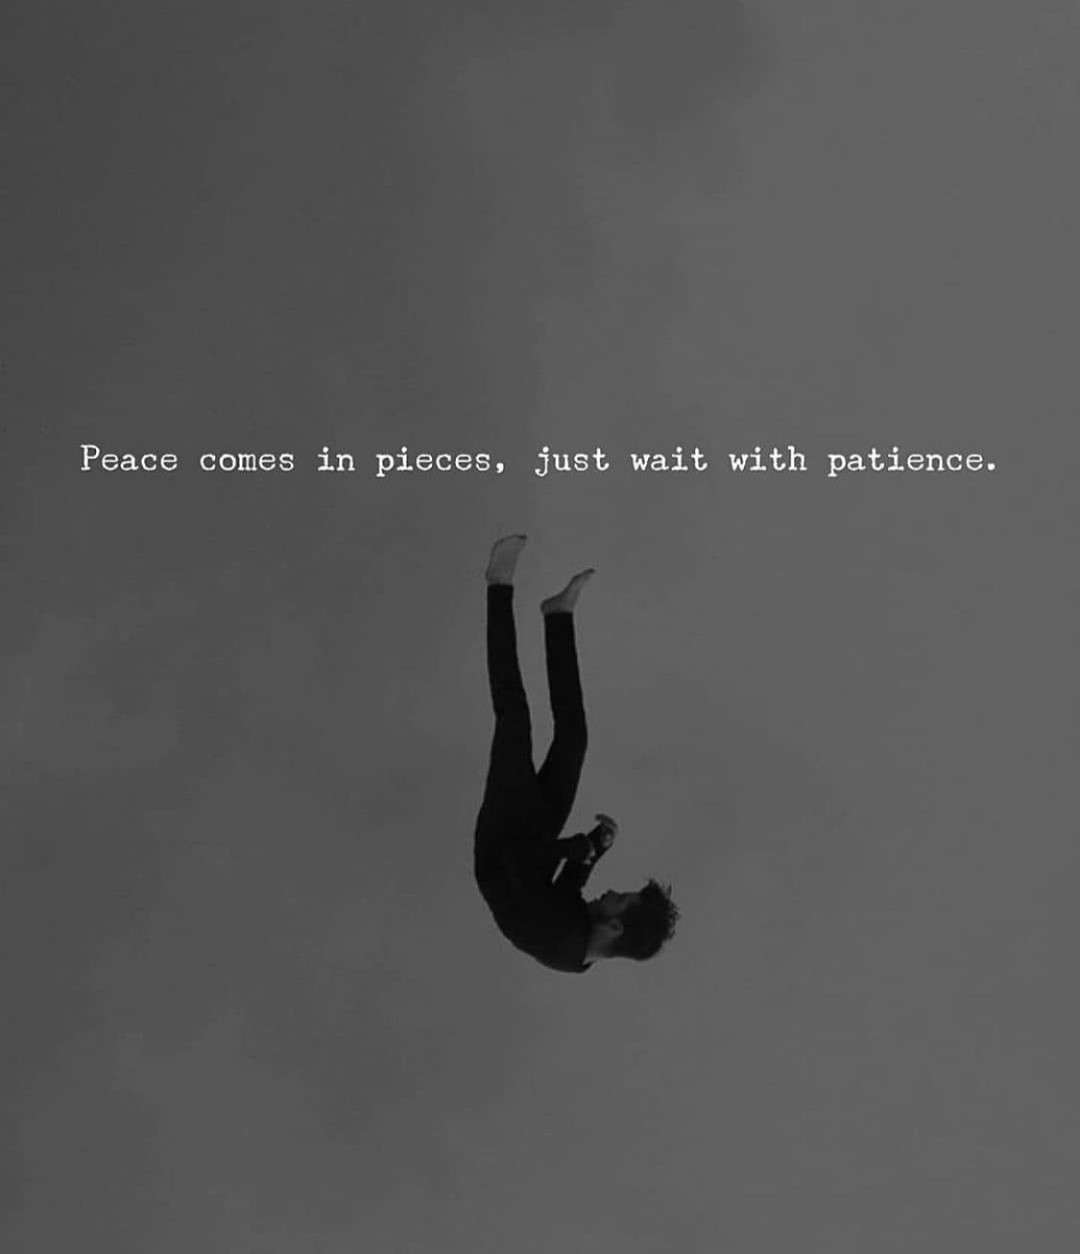 Peace comes in pieces, just wait, with patience.